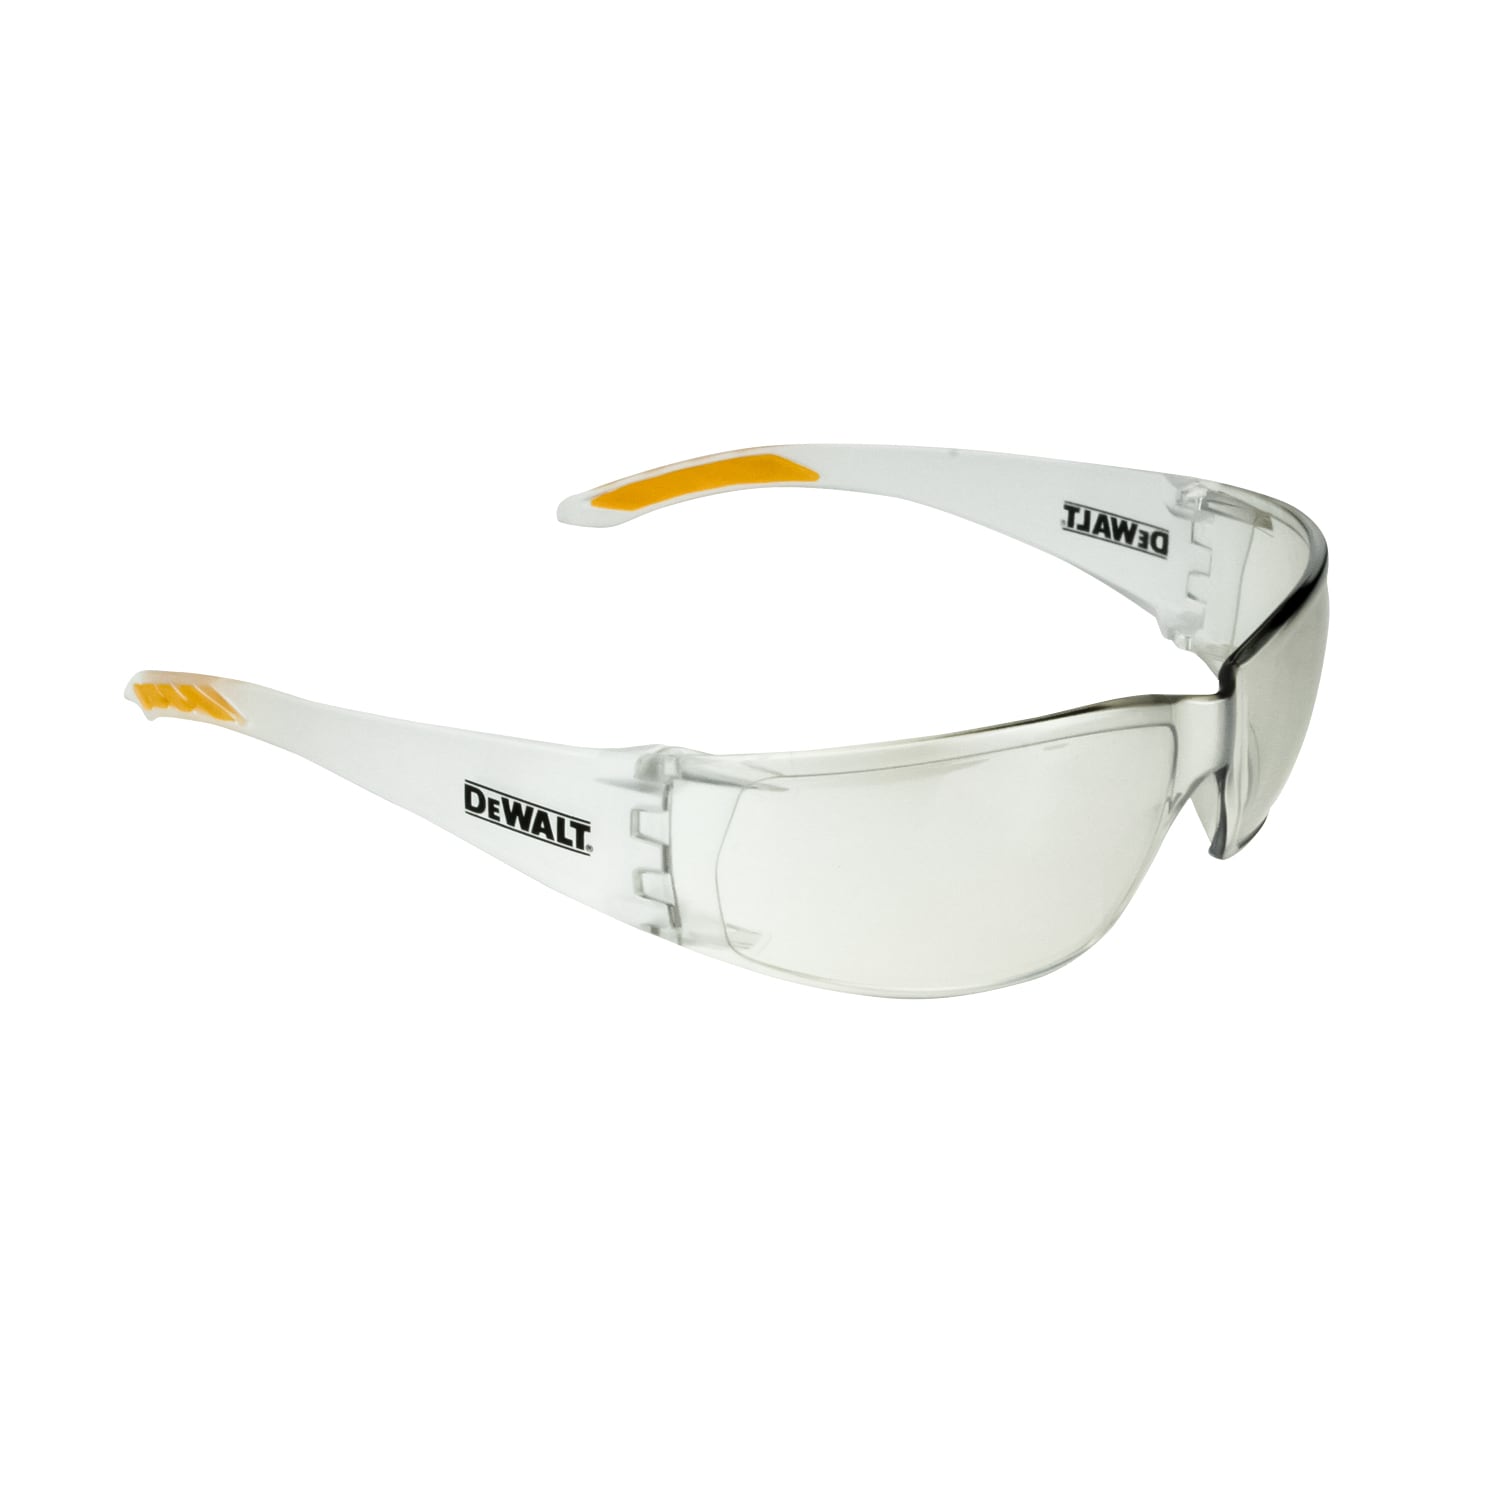 70000AZ Polycarbonate Sealed Safety Glasses/Protective Eyewear Clear Lens, Details about    